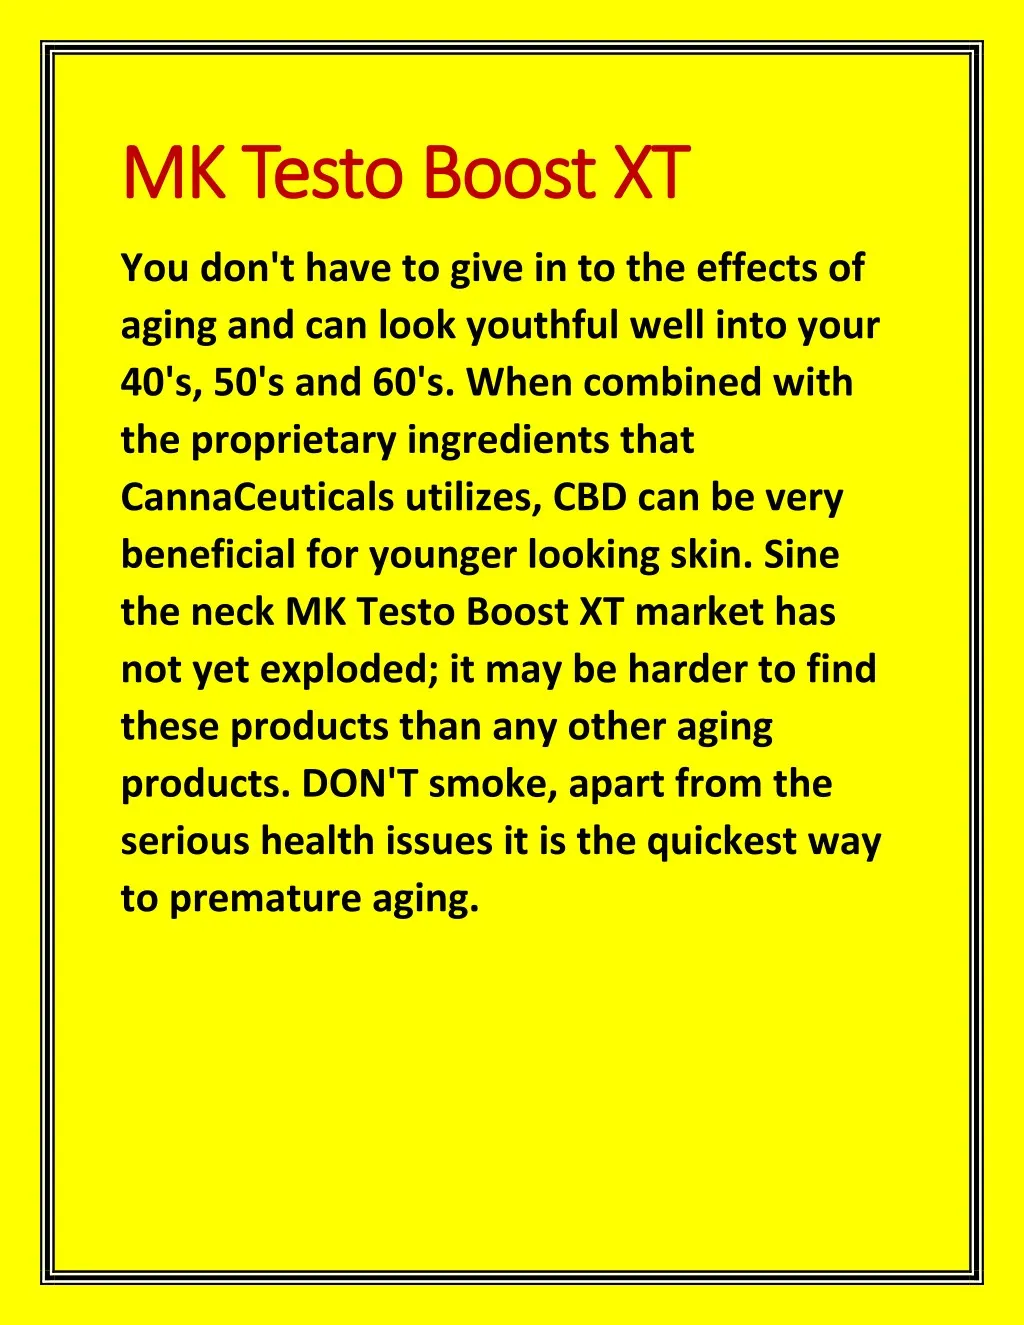 mk testo boost xt you don t have to give